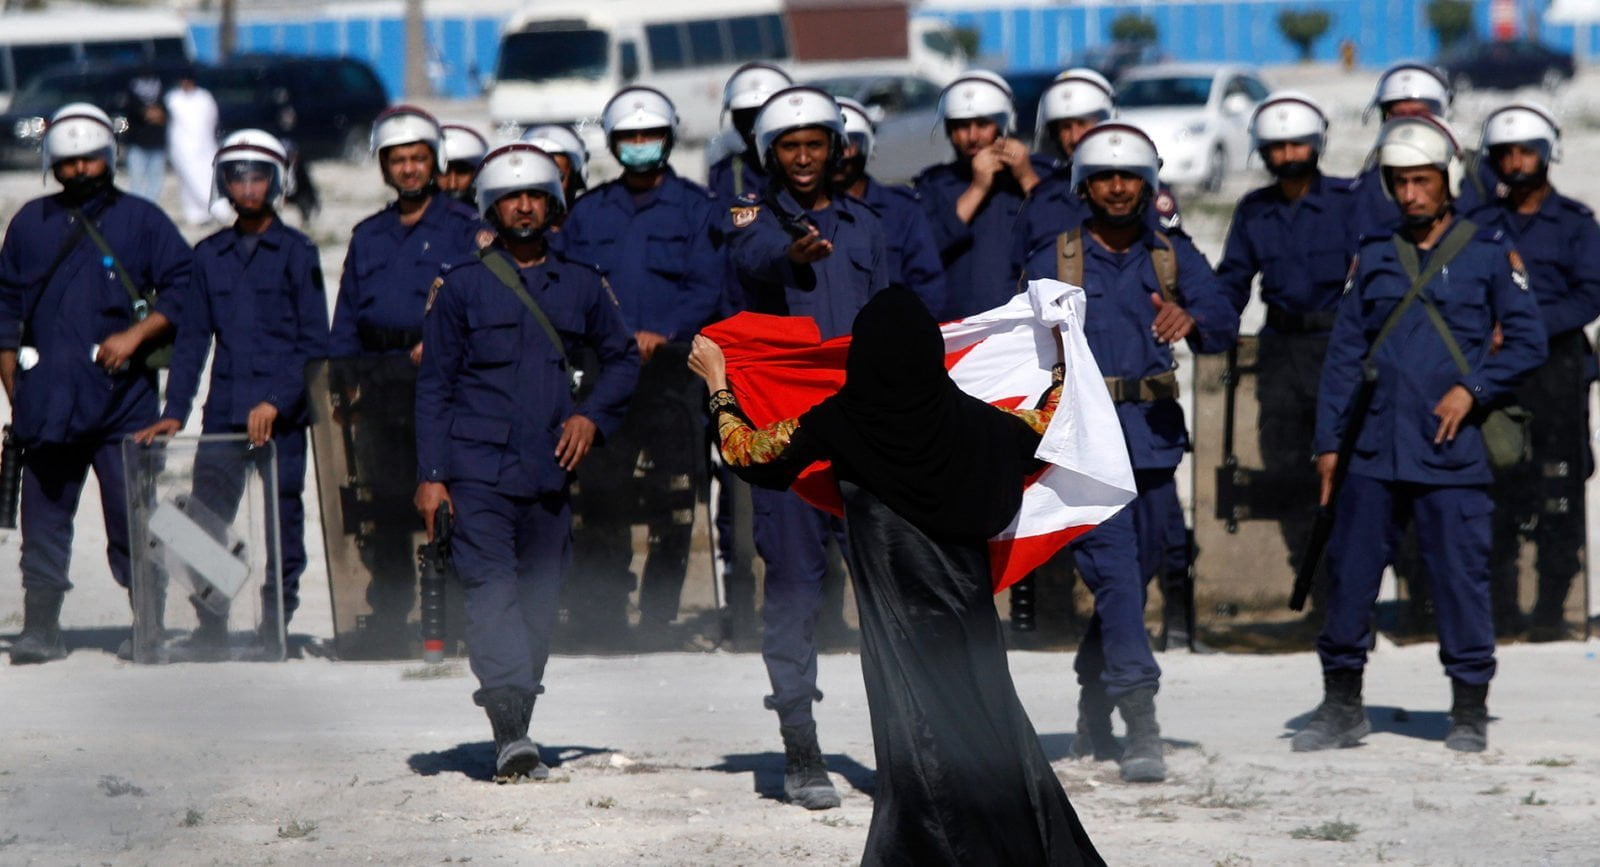 An anti-government protester holds a flag in front of a line of police in Bahrain.